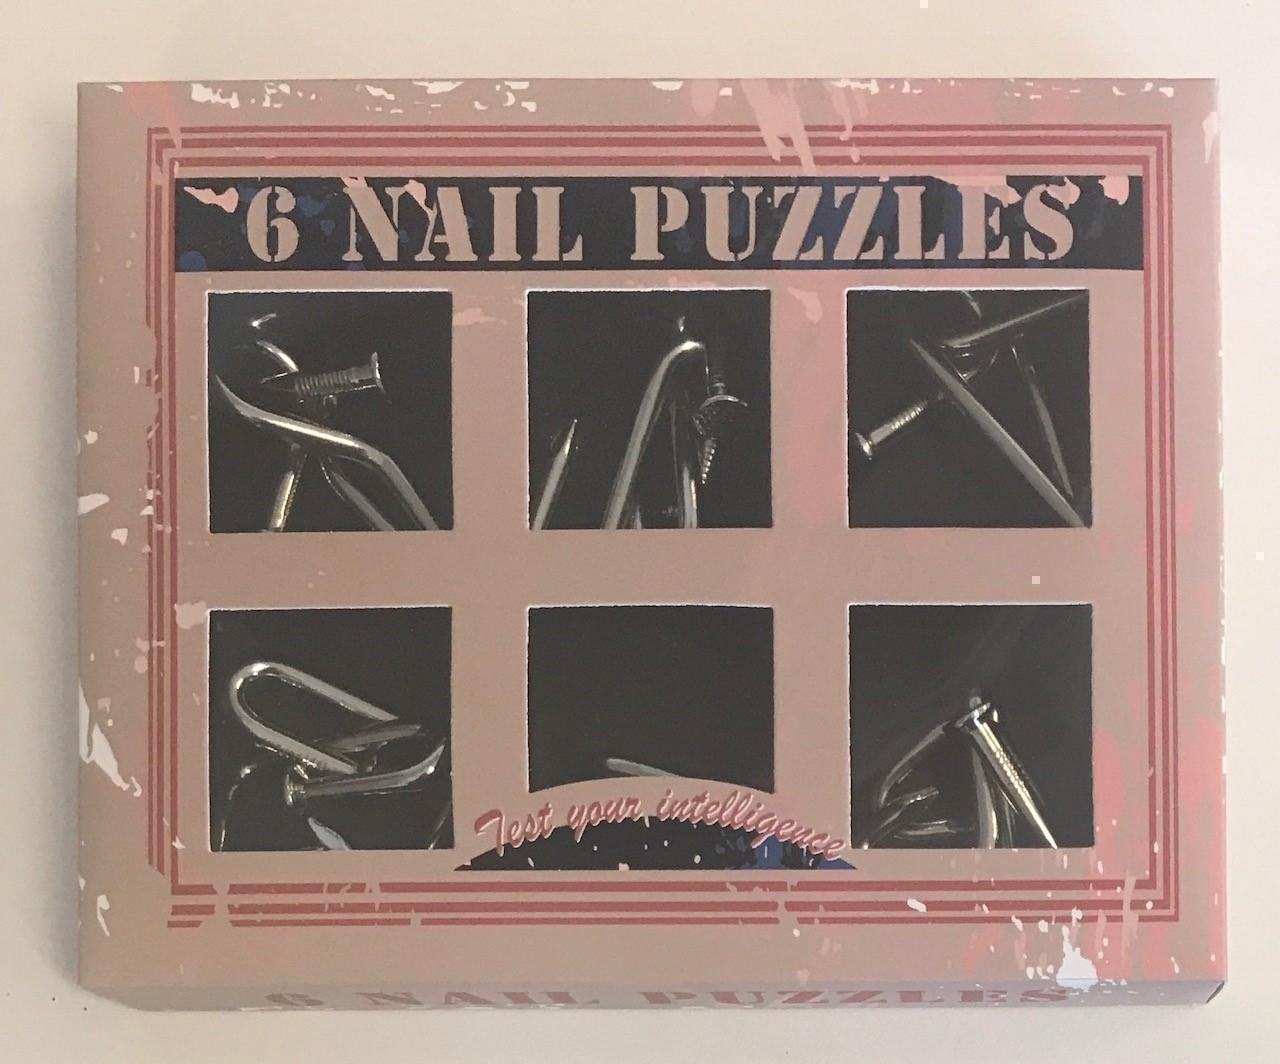 Set of 6 Nail Puzzles Test Your Brain Activity